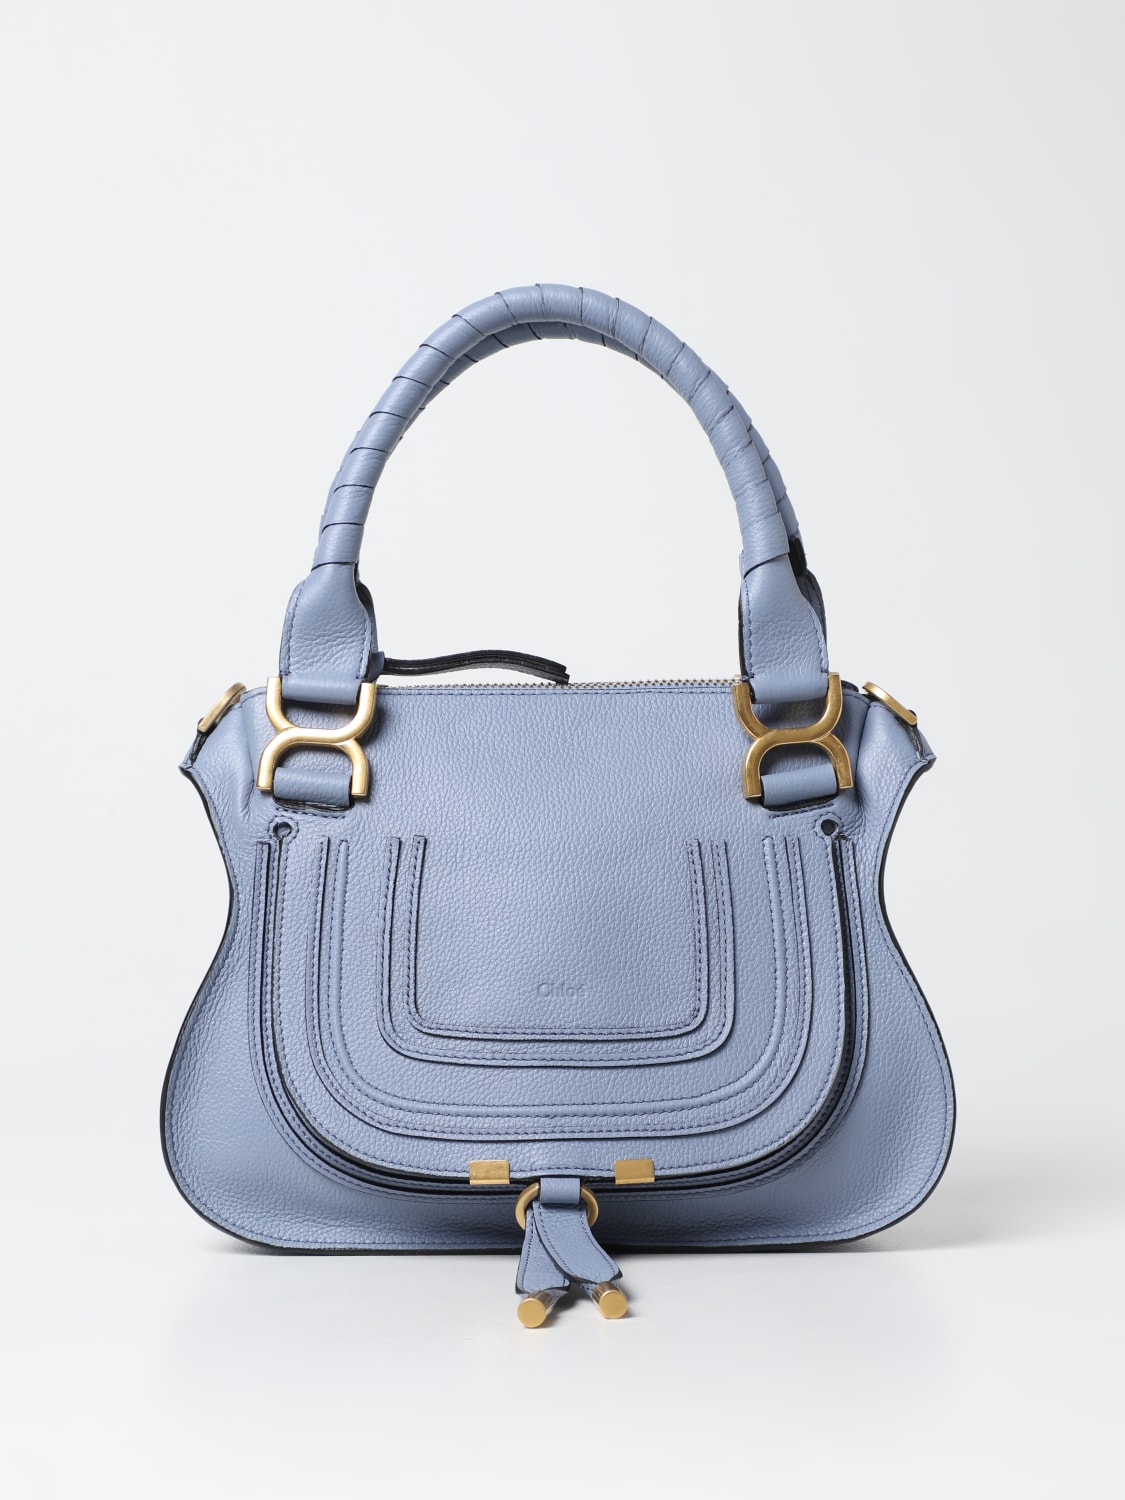 Marcie Chloé Bag in Grained Leather